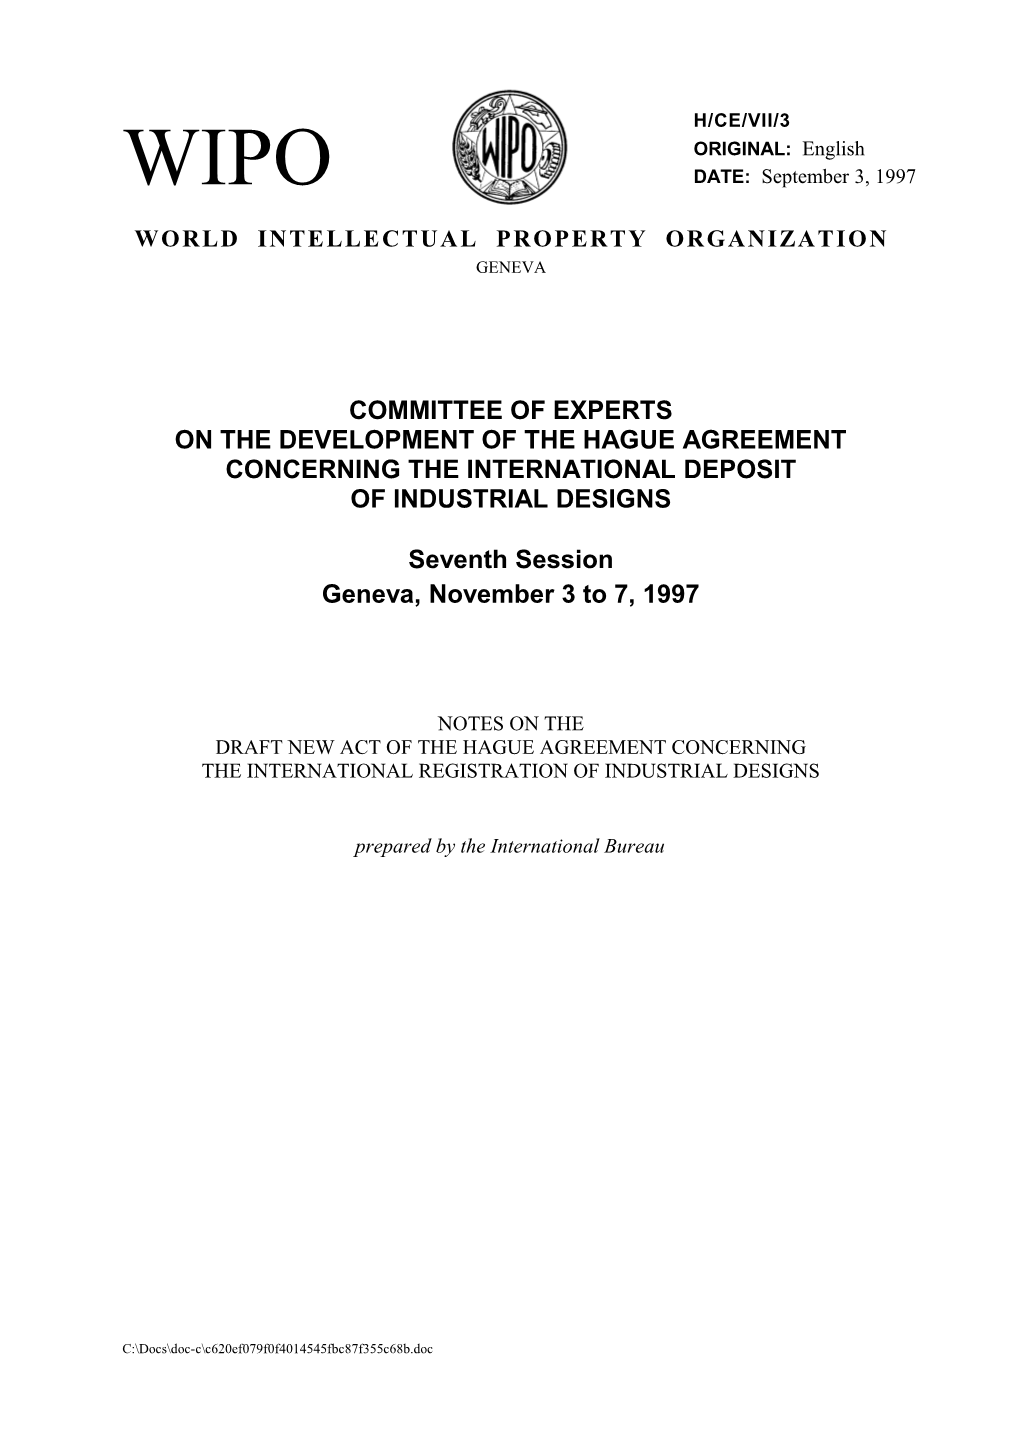 H/CE/VII/3: Notes on the Draft New Act of the Hague Agreement Concerning the International